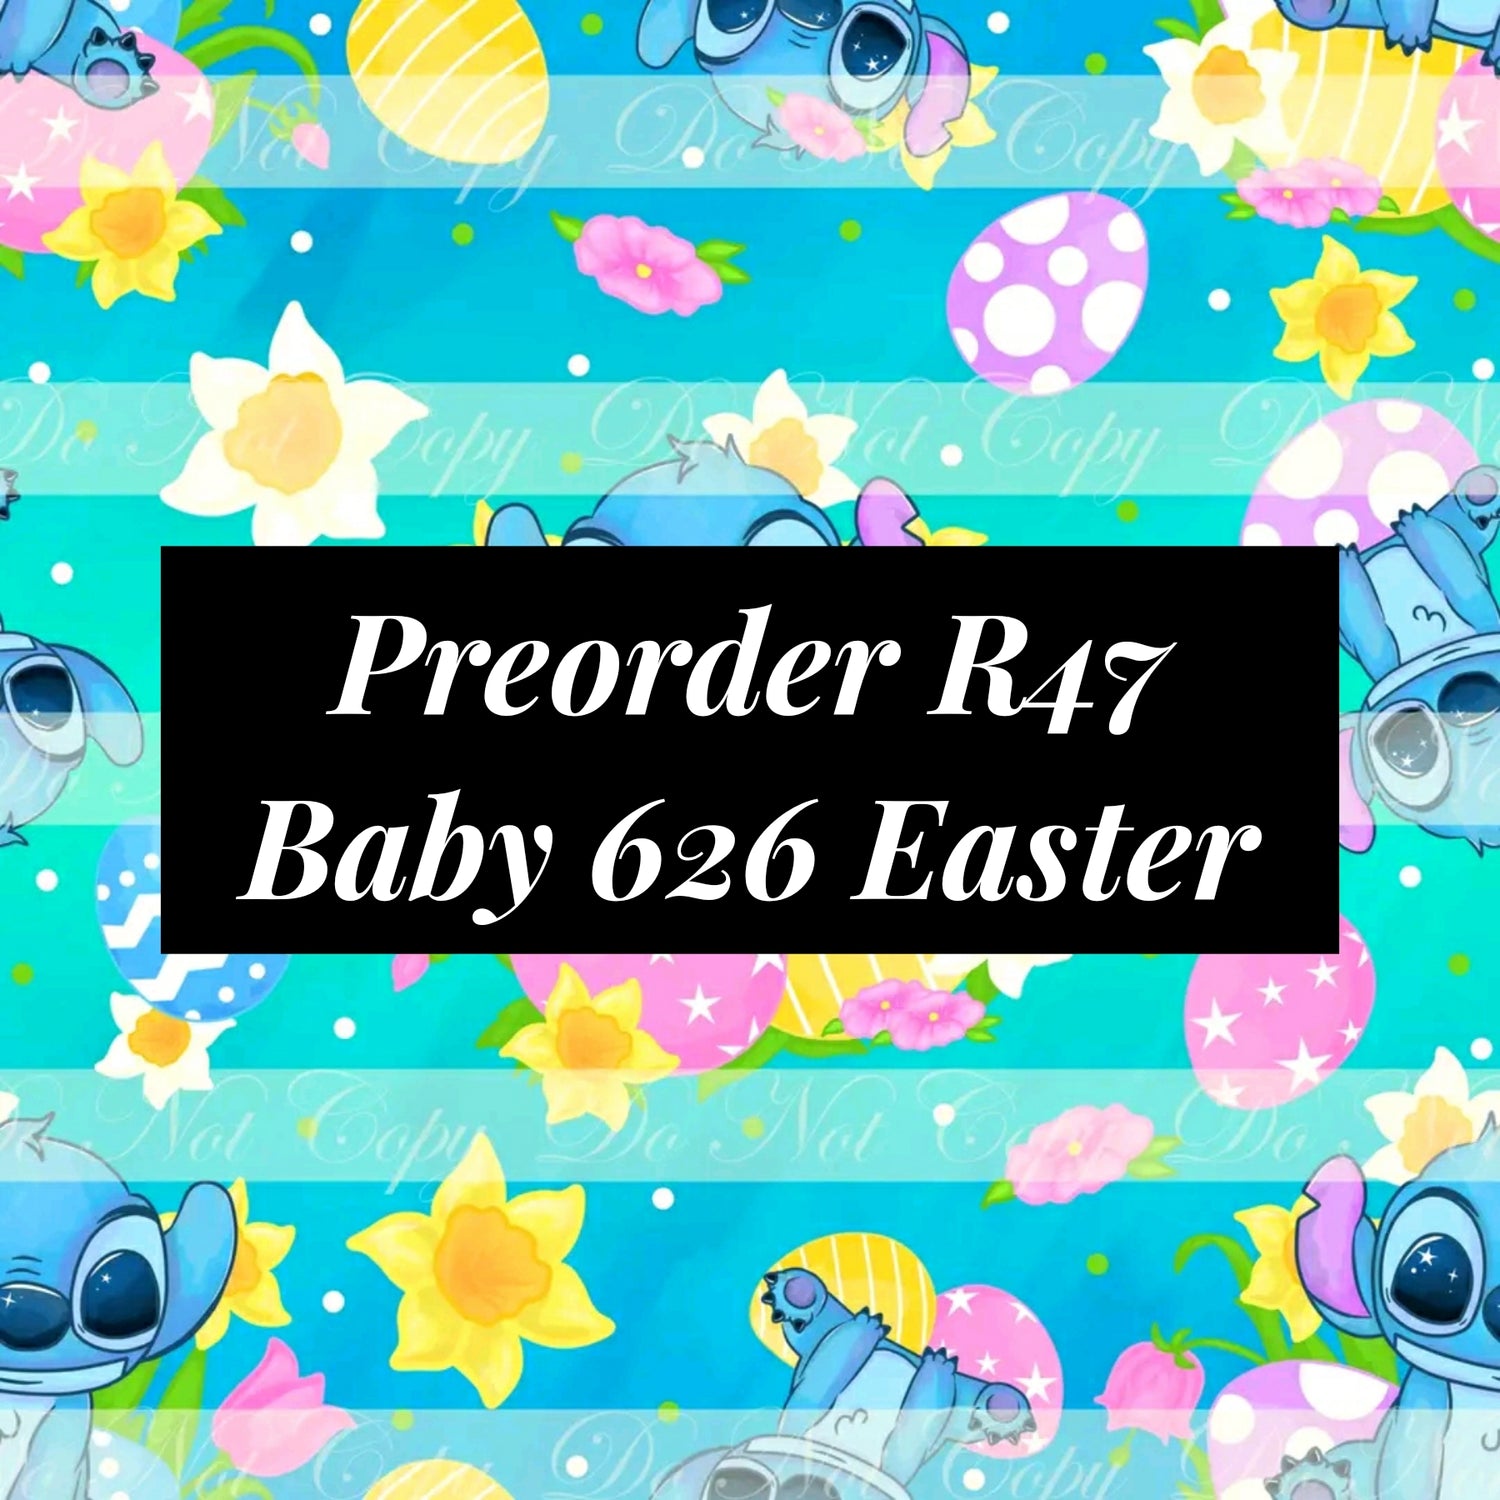 Preorder R47 Baby 626 Easter